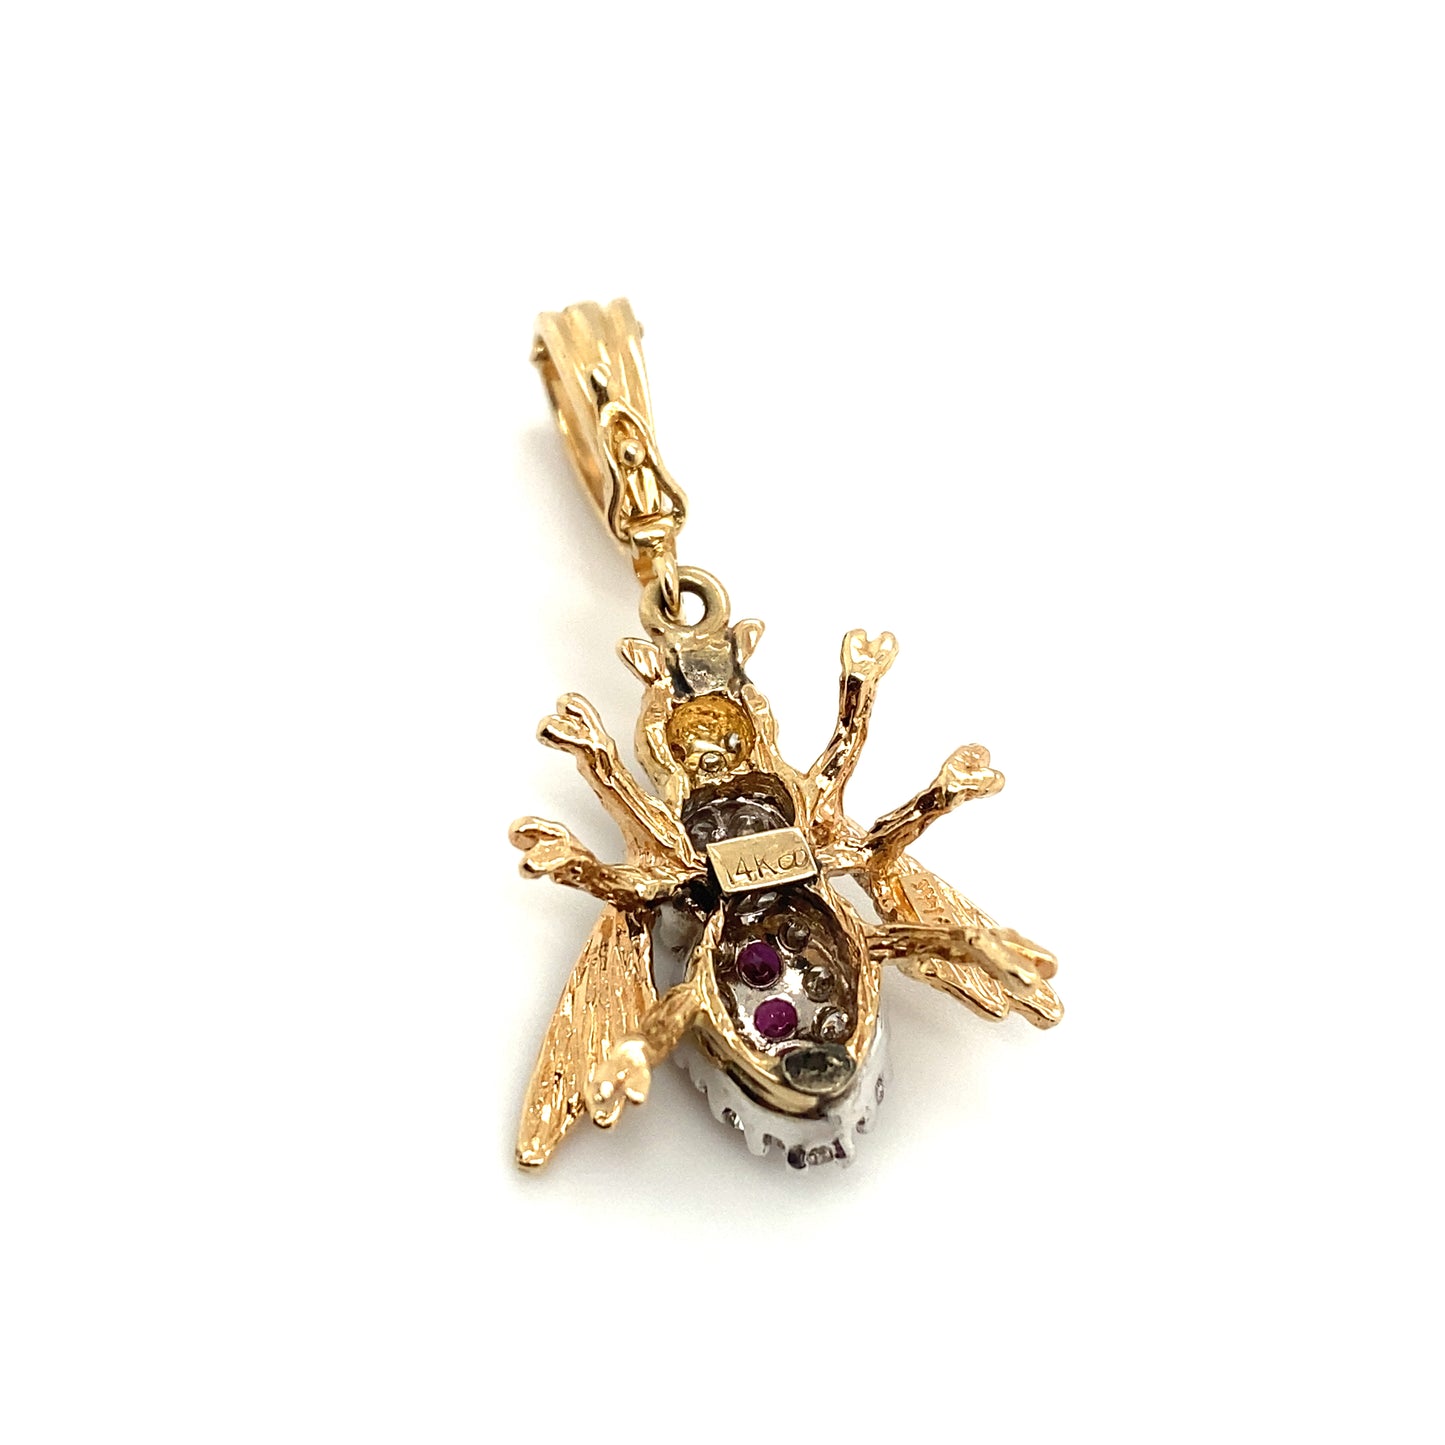 Circa 1980s Ruby and Diamond Bee Pendant in 14K White/Yellow Gold